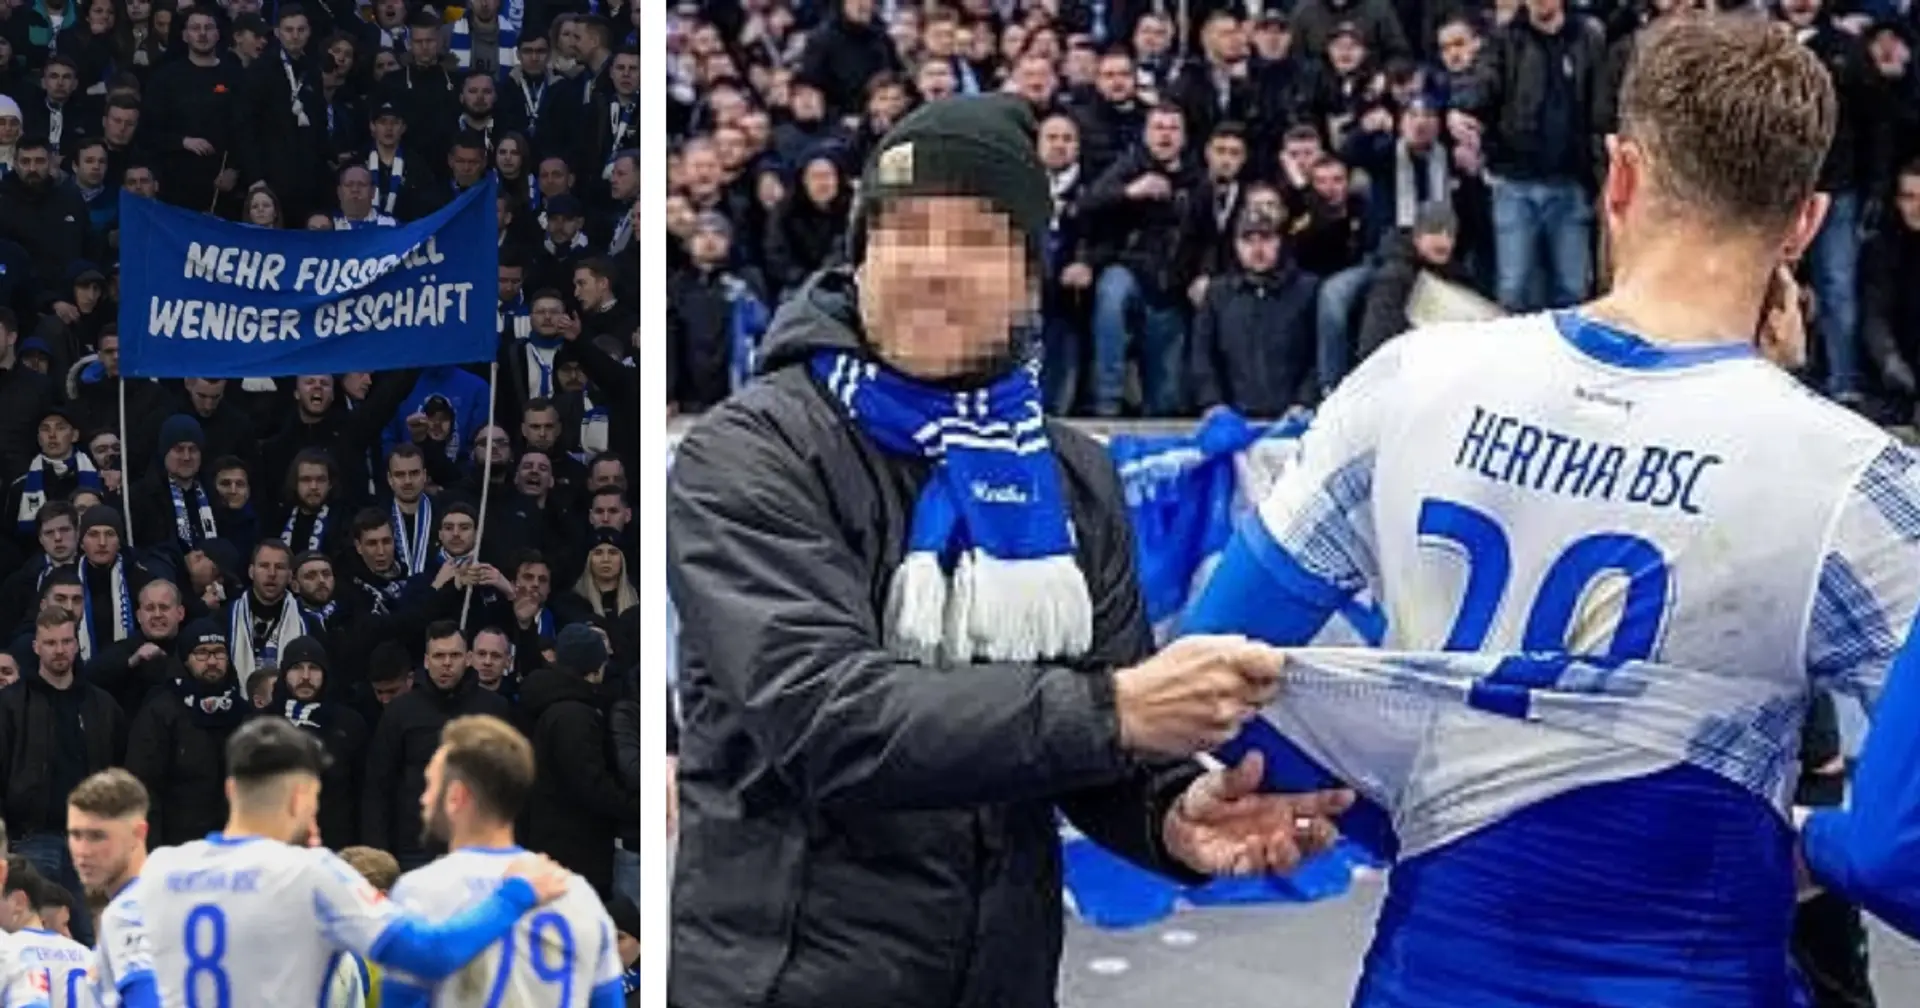 Hertha BSC players told to 'take off jerseys and lay them before fans' after 1-4 derby defeat